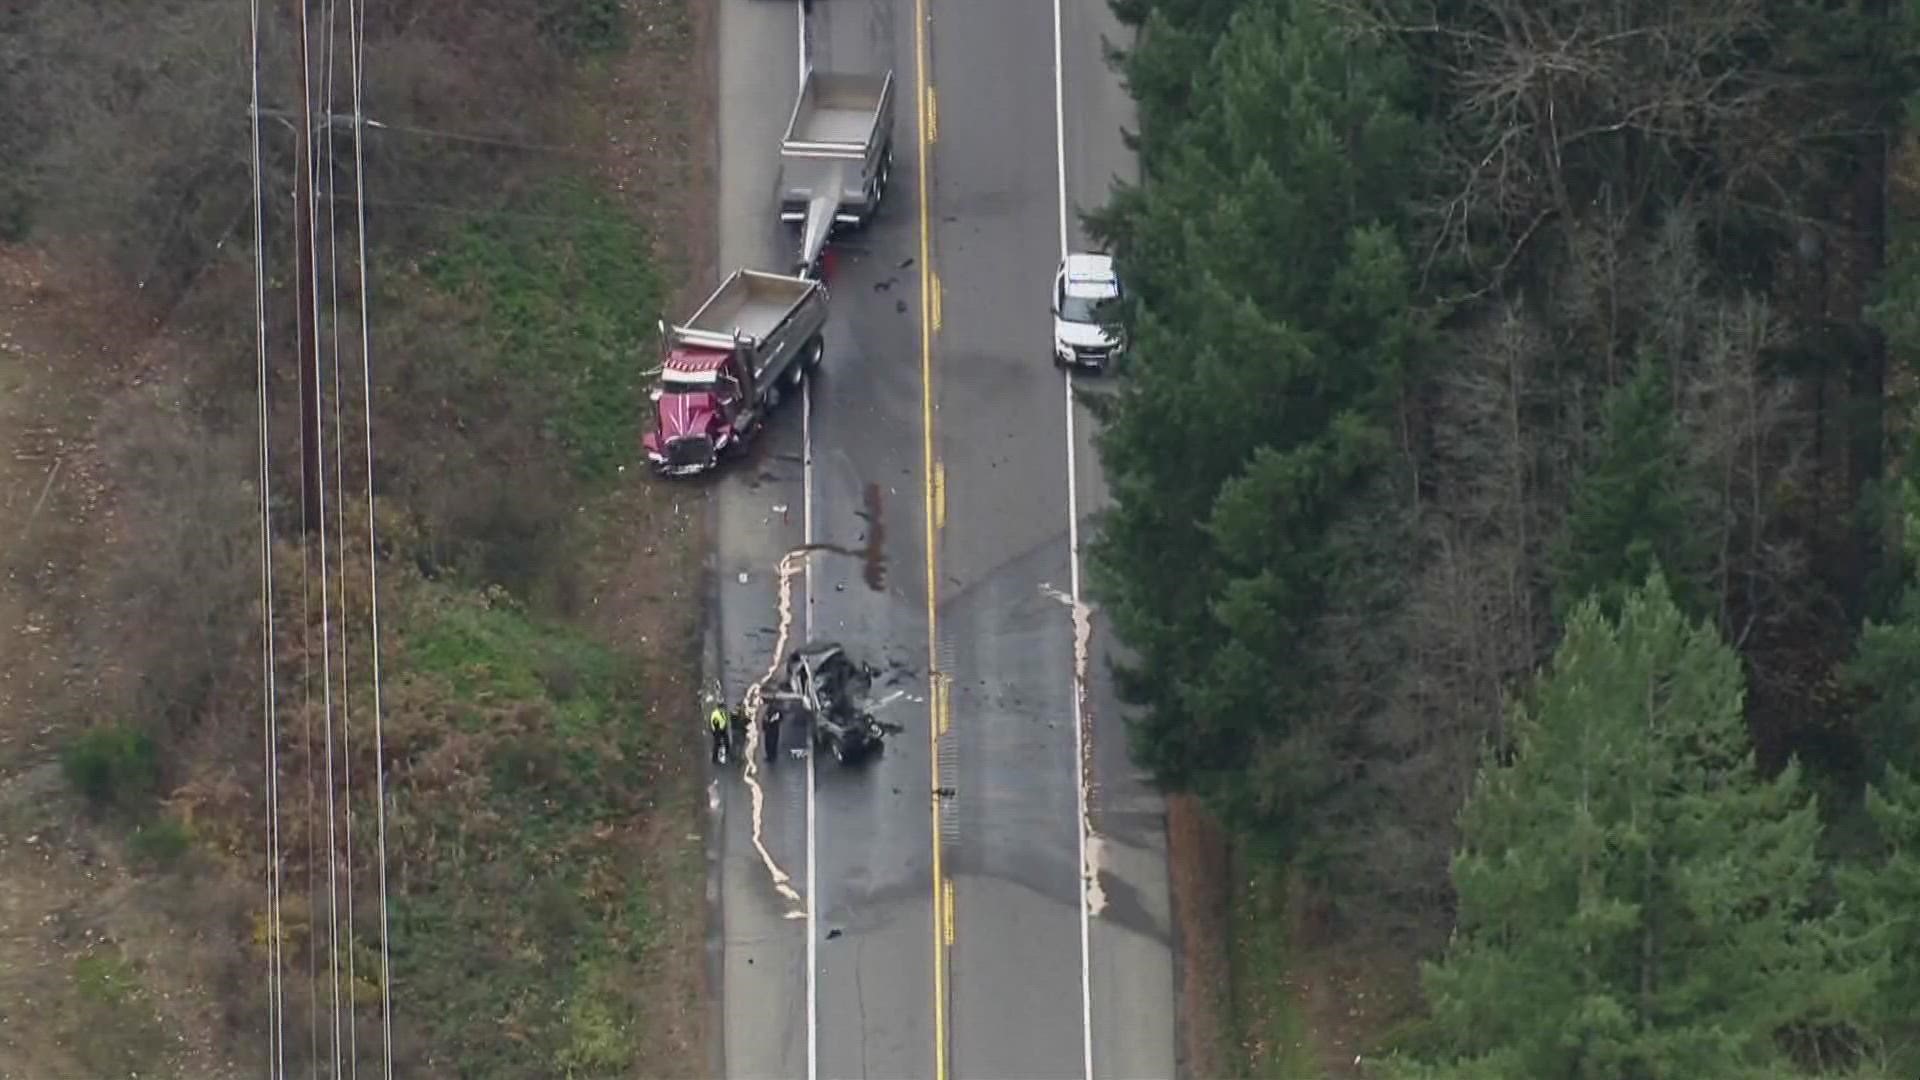 The highway is closed between Old Owen Road and U.S. 2 in Monroe and Fern Bluff Road and U.S. 2 in Sultan, according to the Snohomish County Sheriff's Office.